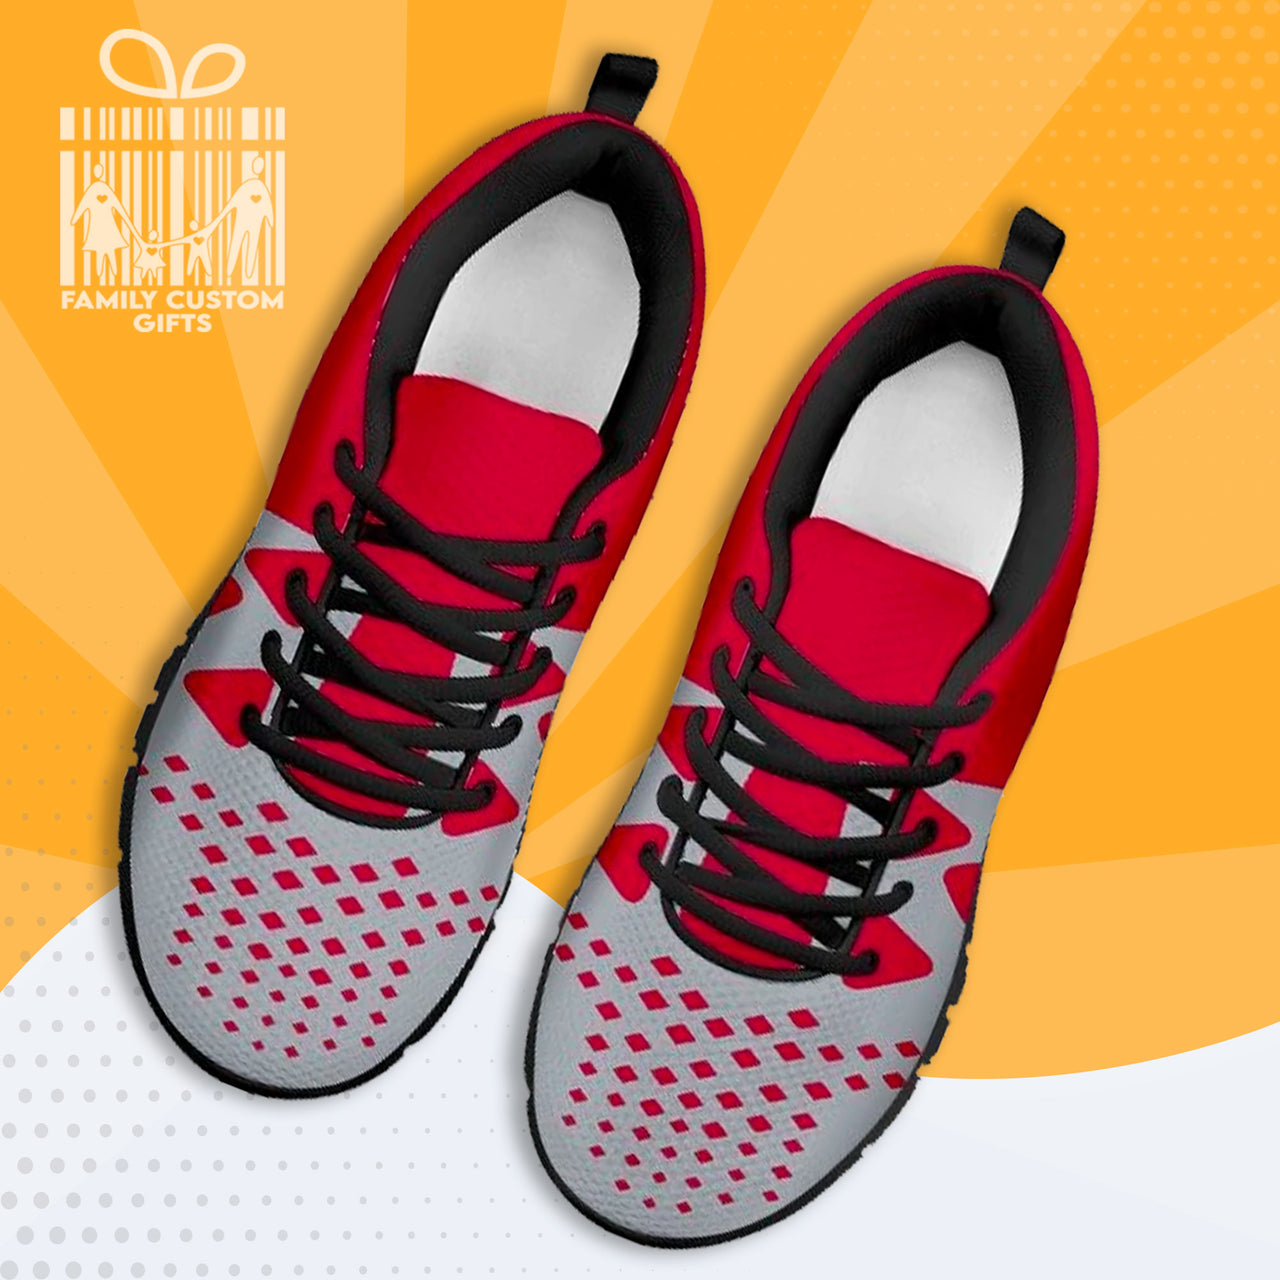 Ohio State Custom Shoes for Men Women 3D Print Fashion Sneaker Gifts for Her Him